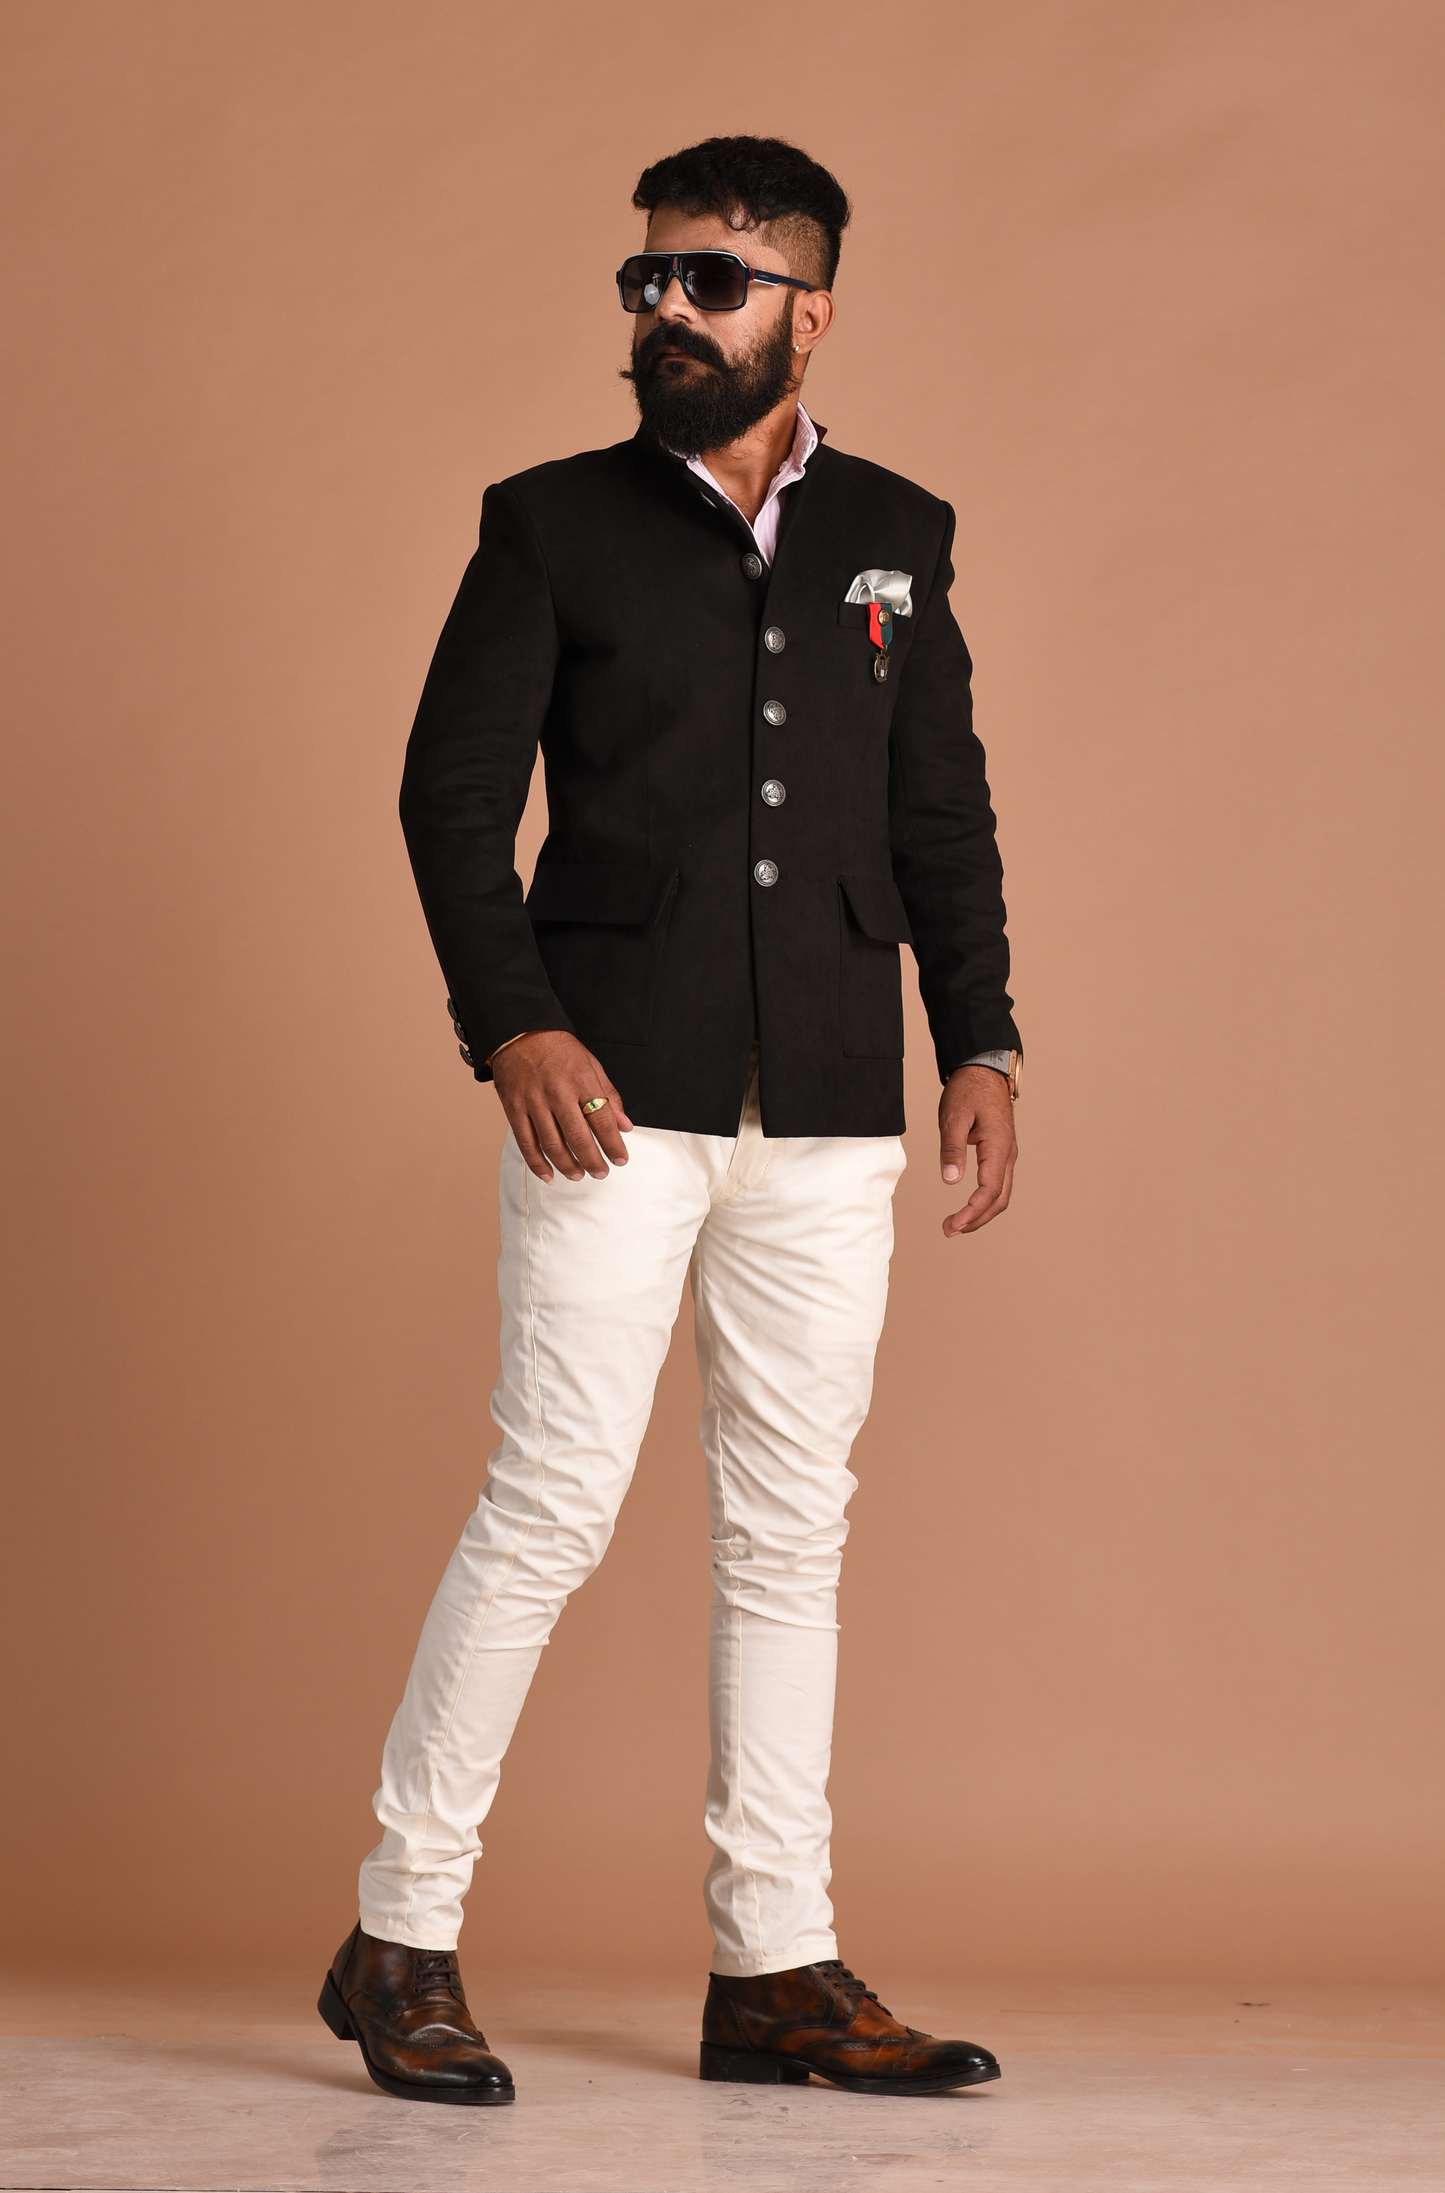 Suede Leather Black Bandhgala With White Trouser